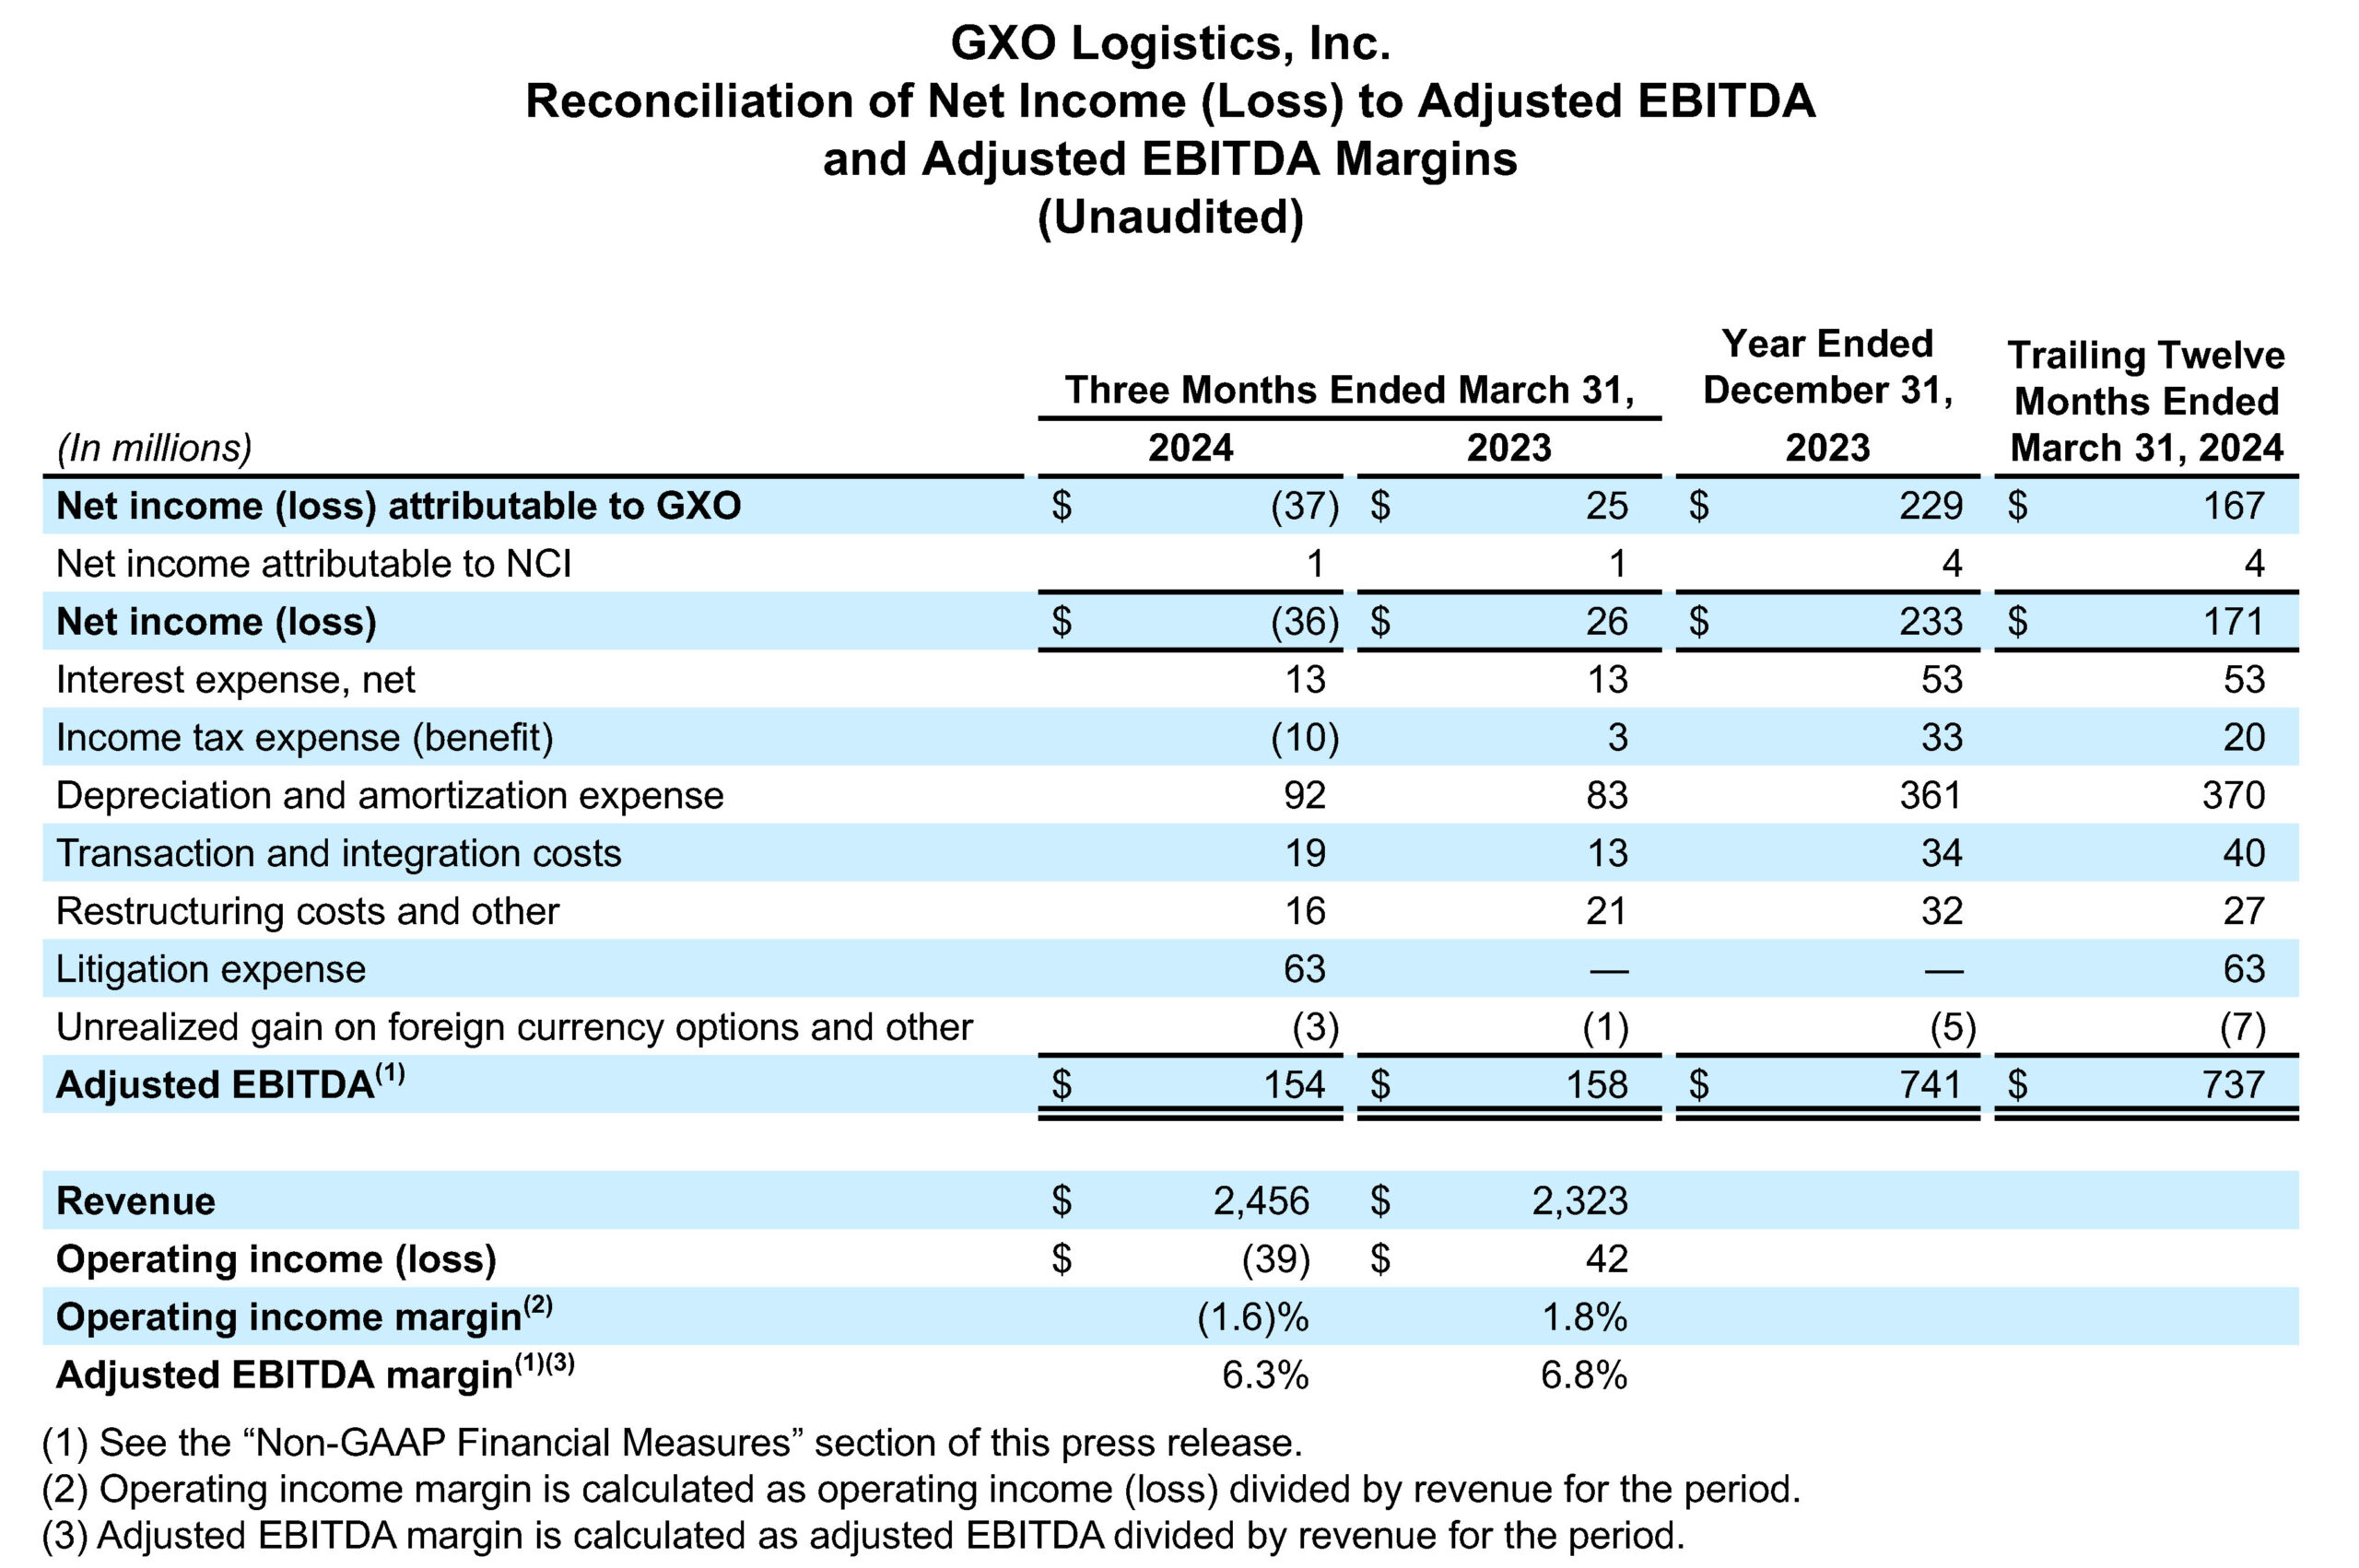 Reconciliation of Net Income (Loss) to Adjusted EBITDA and Adjusted EBITDA Margins